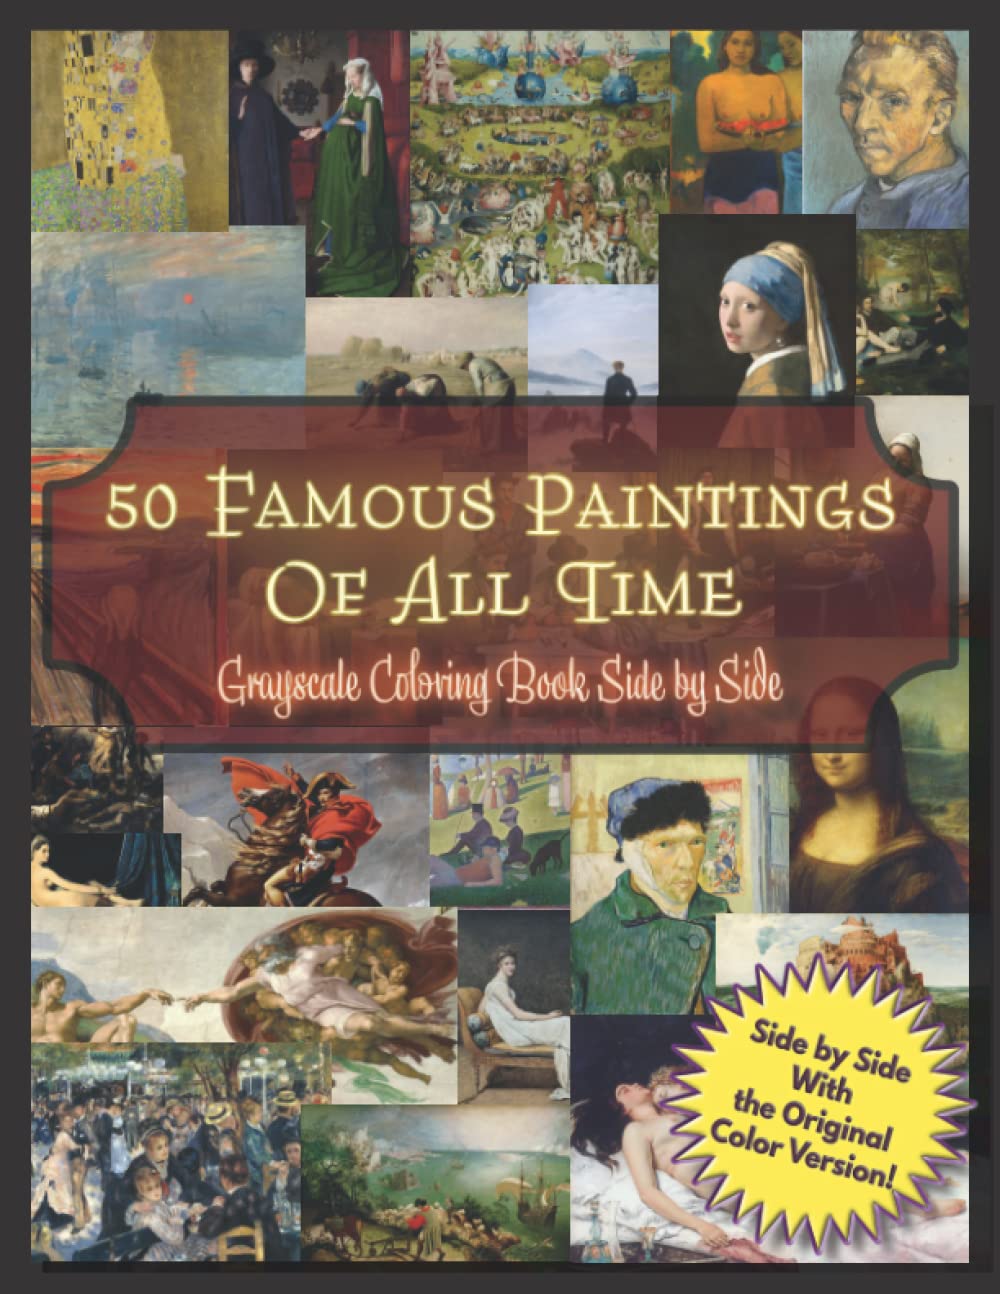 50 Famous Paintings of All Times - Grayscale Coloring Book